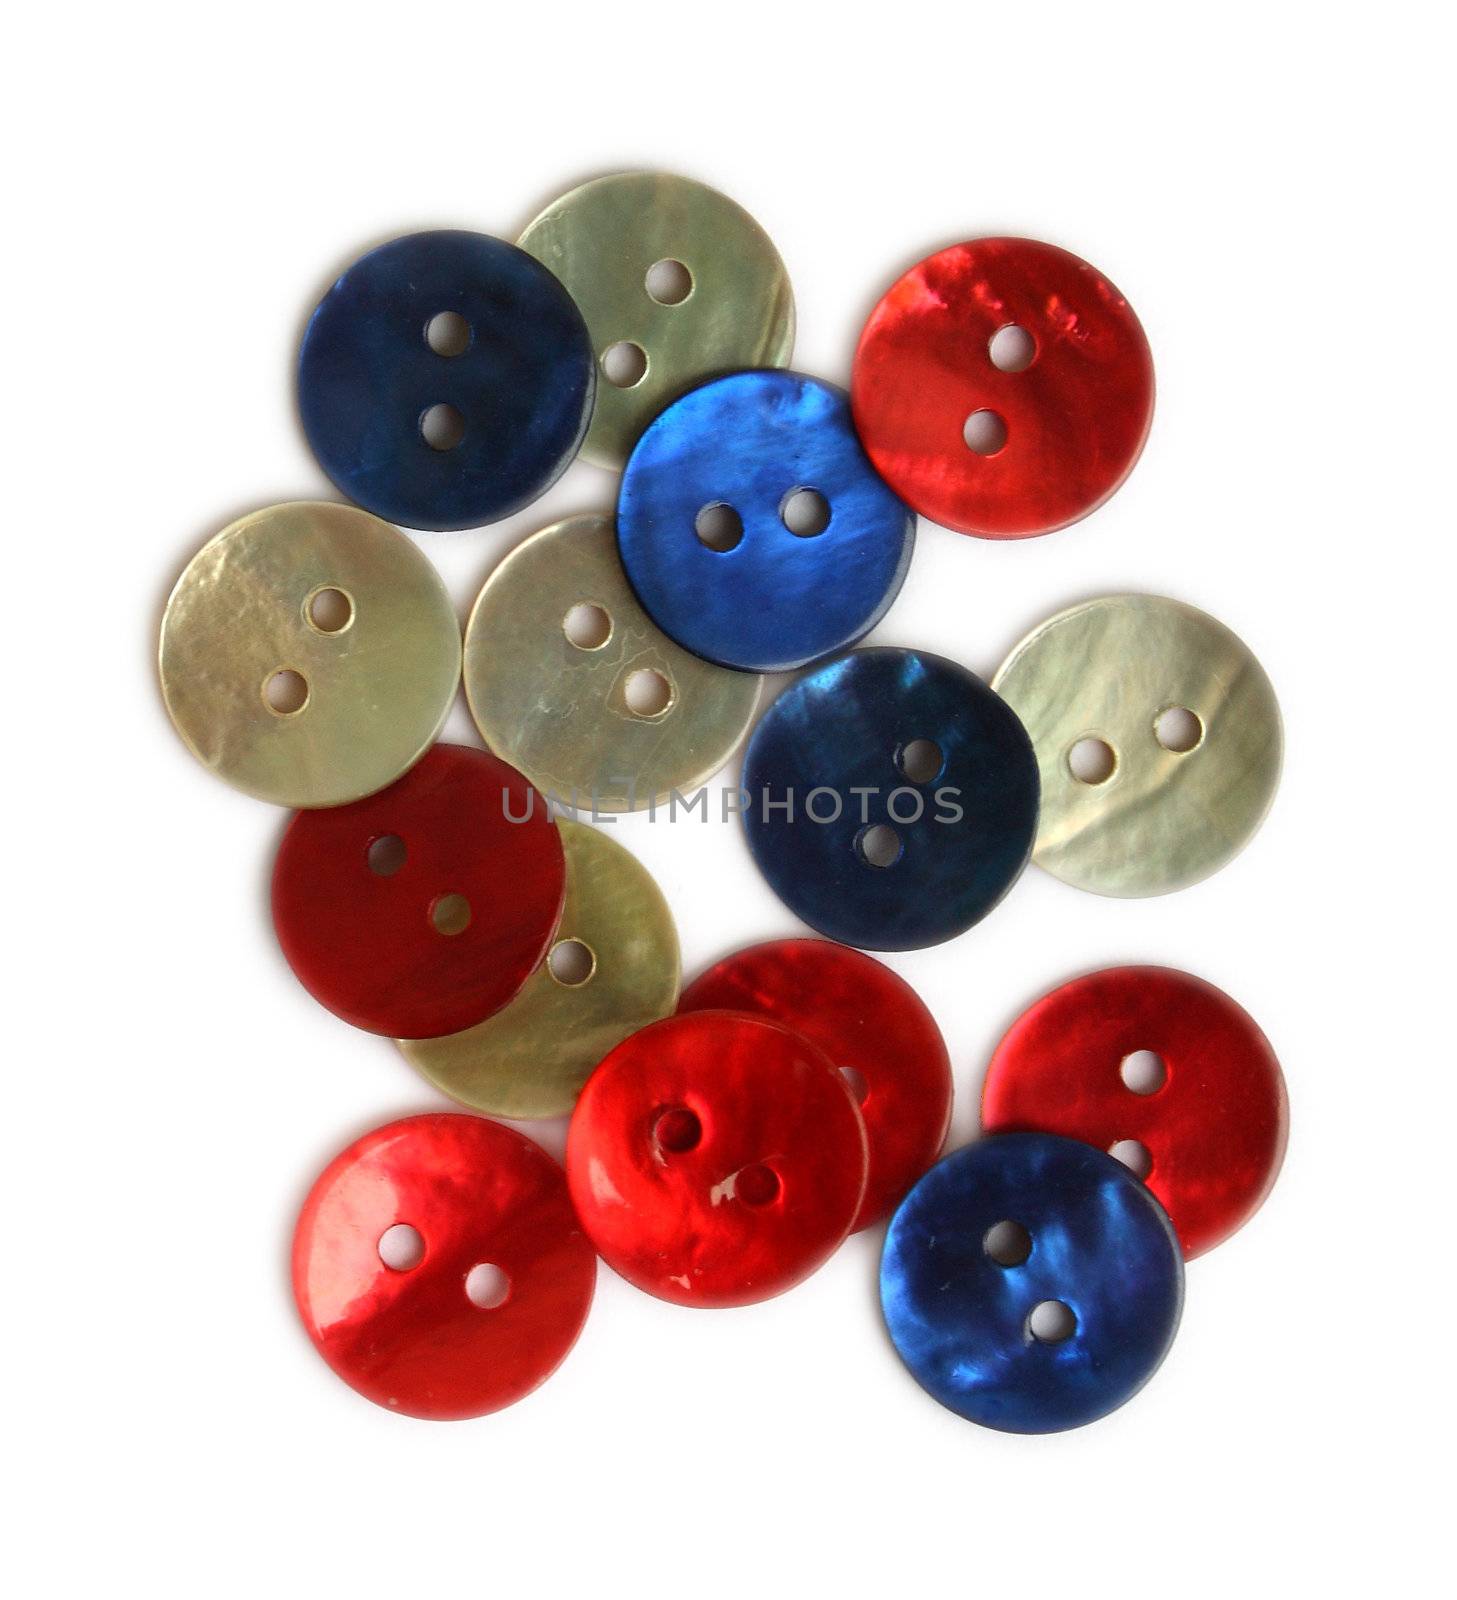 Red, white and blue buttons made from mother of pearl